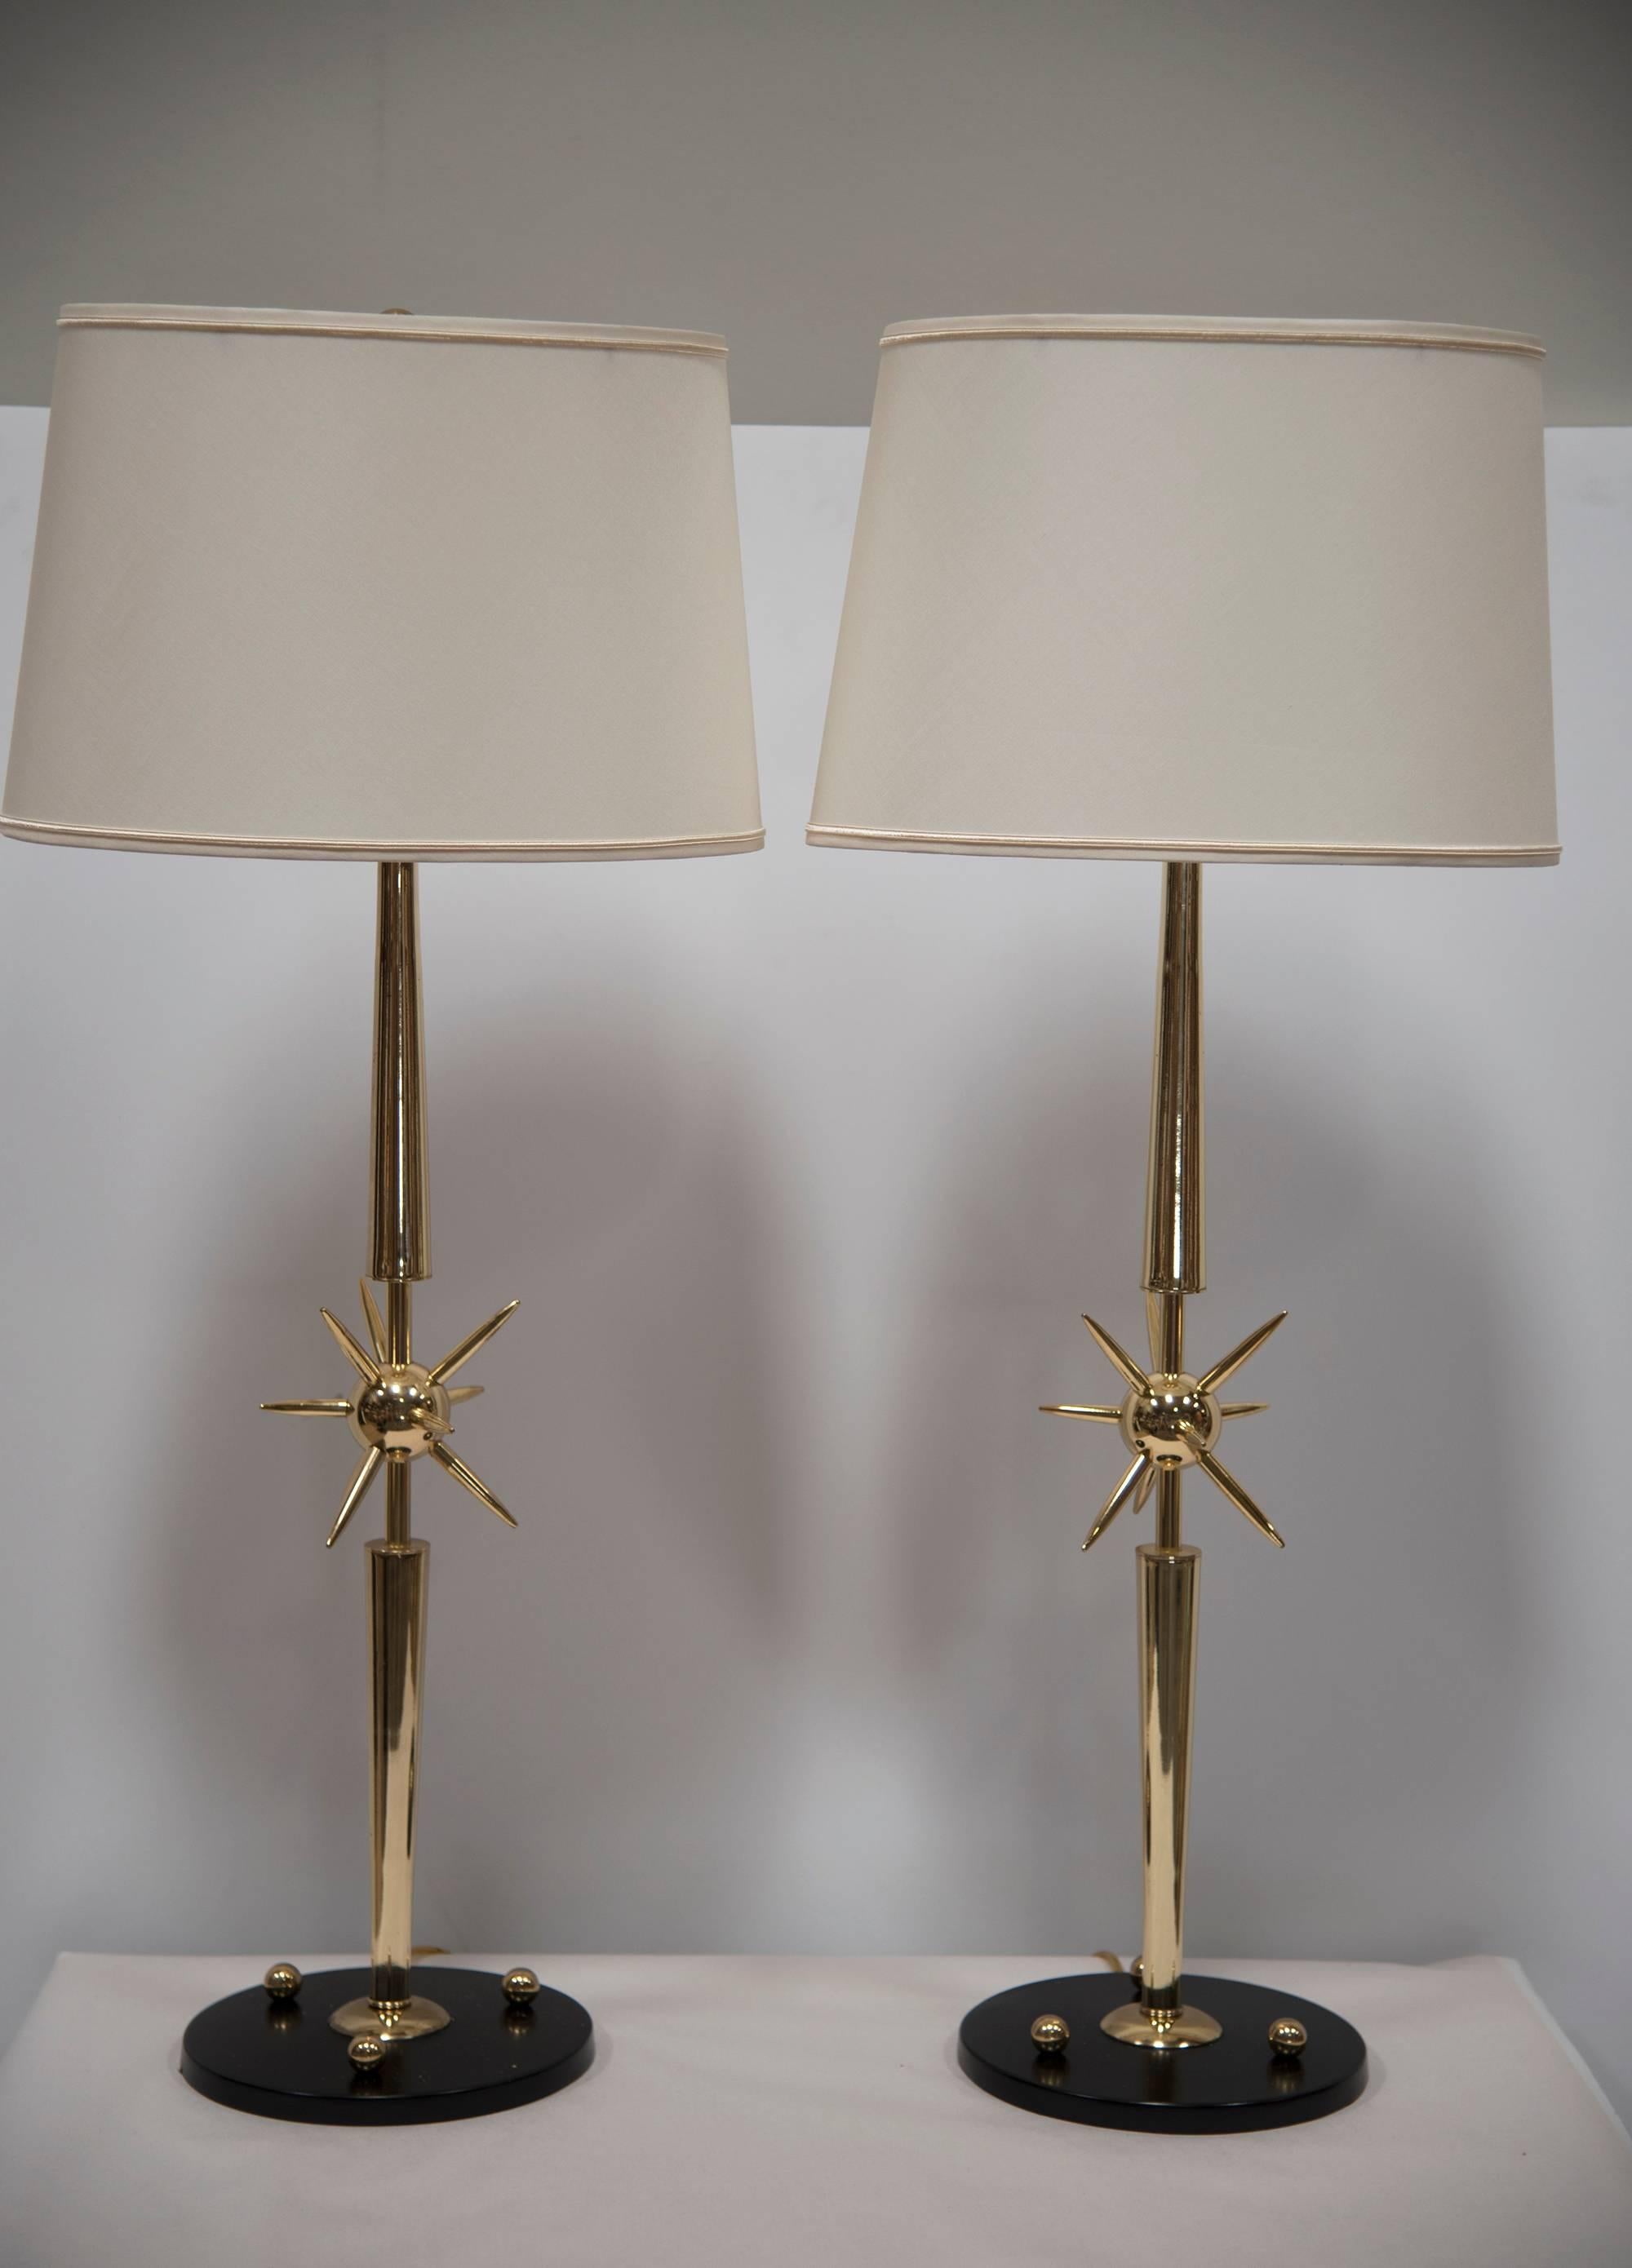 A pair of tall, elegant, conversation piece brass table lamps in the form of starbursts in the centre of each column. Brass with lacquer black base accessorised with studs. Lamp shades are pristine condition with a high-end linen finish and gilt